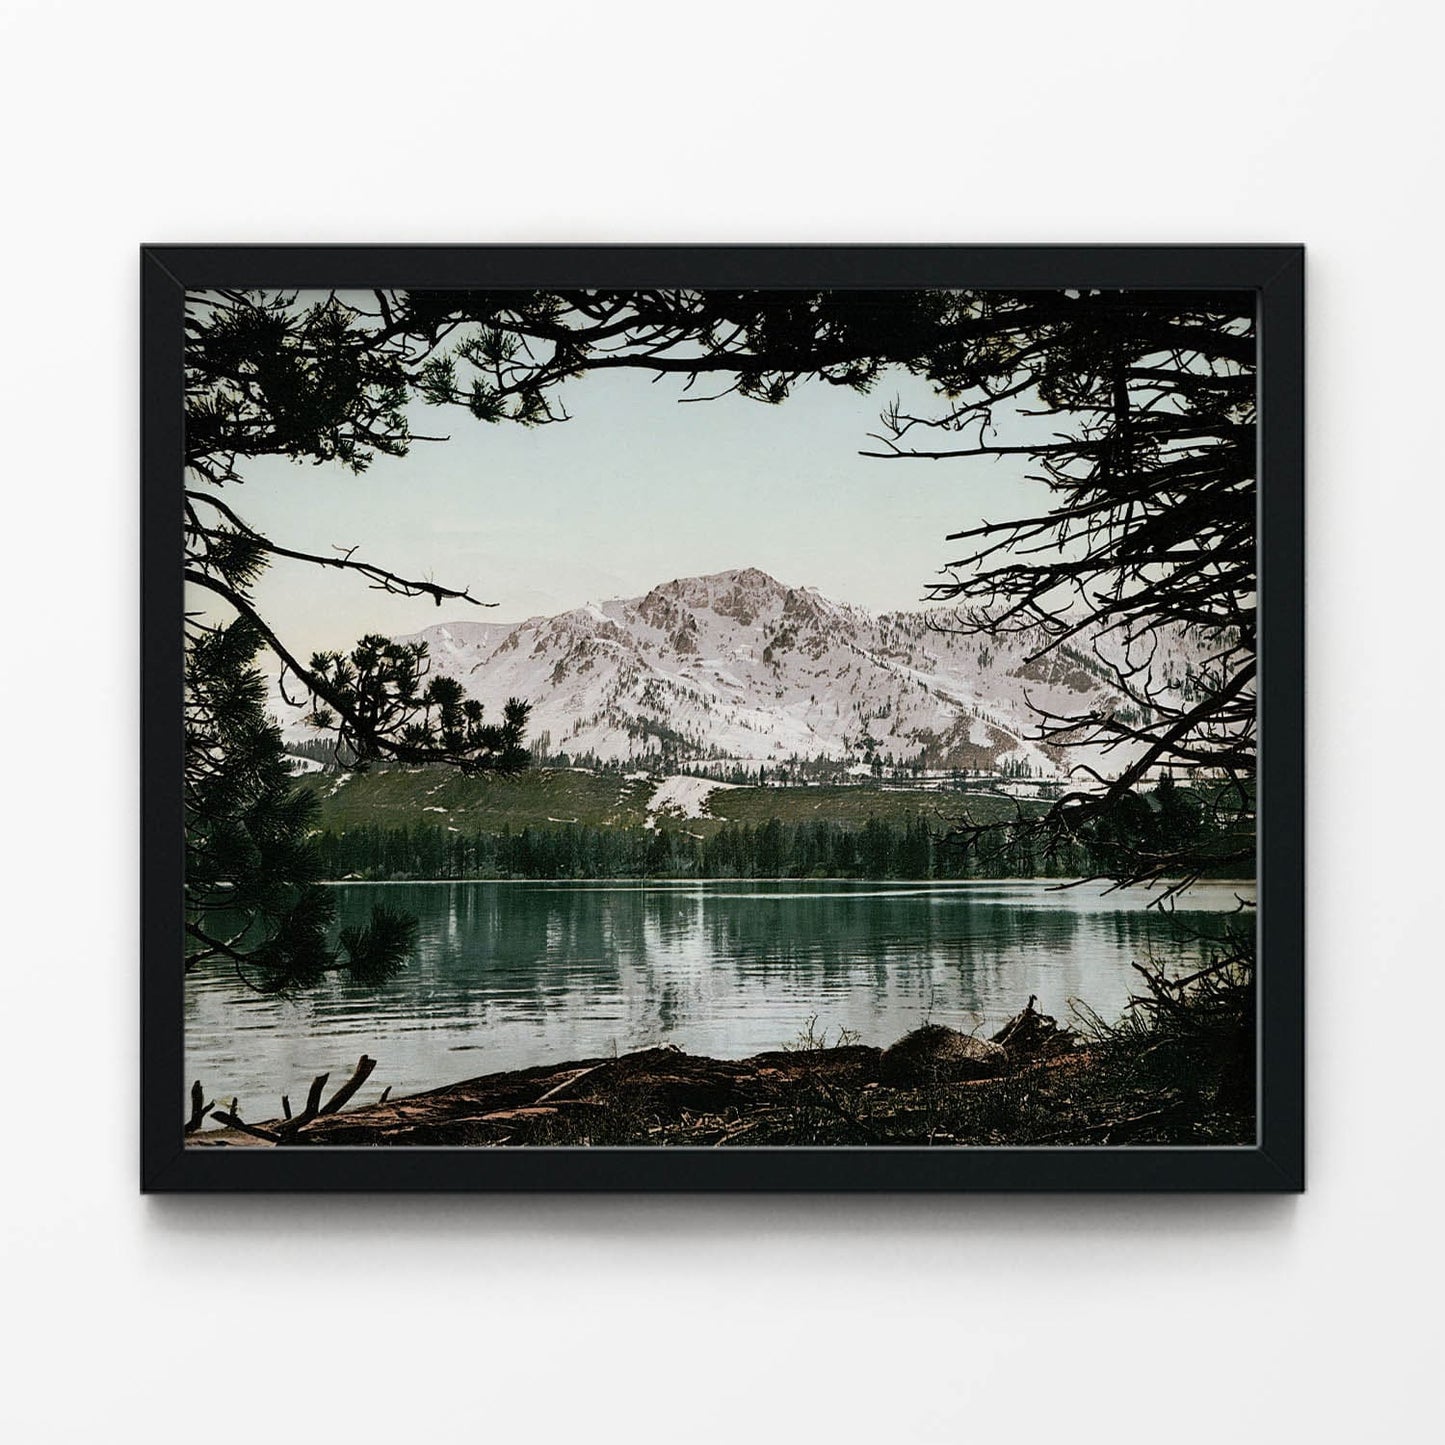 Lake in the Wilderness Picture in Black Picture Frame